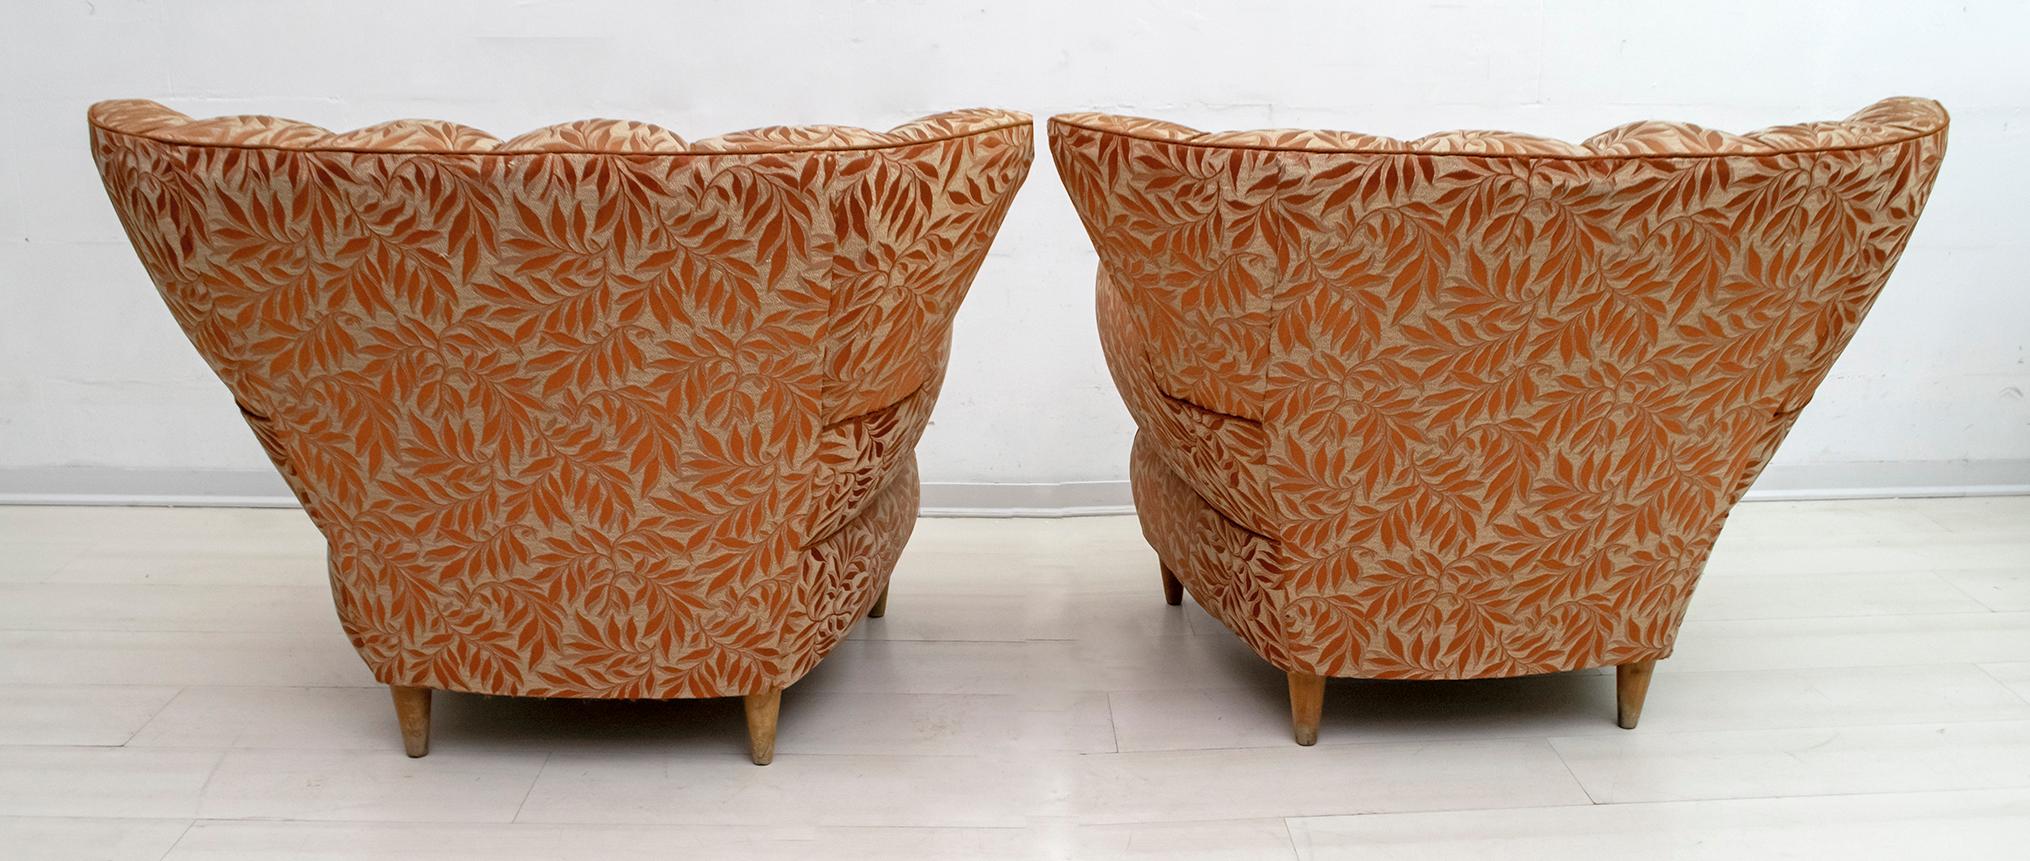 Mid-20th Century Pair of Gugliemo Ulrich Art Deco Italian Armchairs, 1940s For Sale